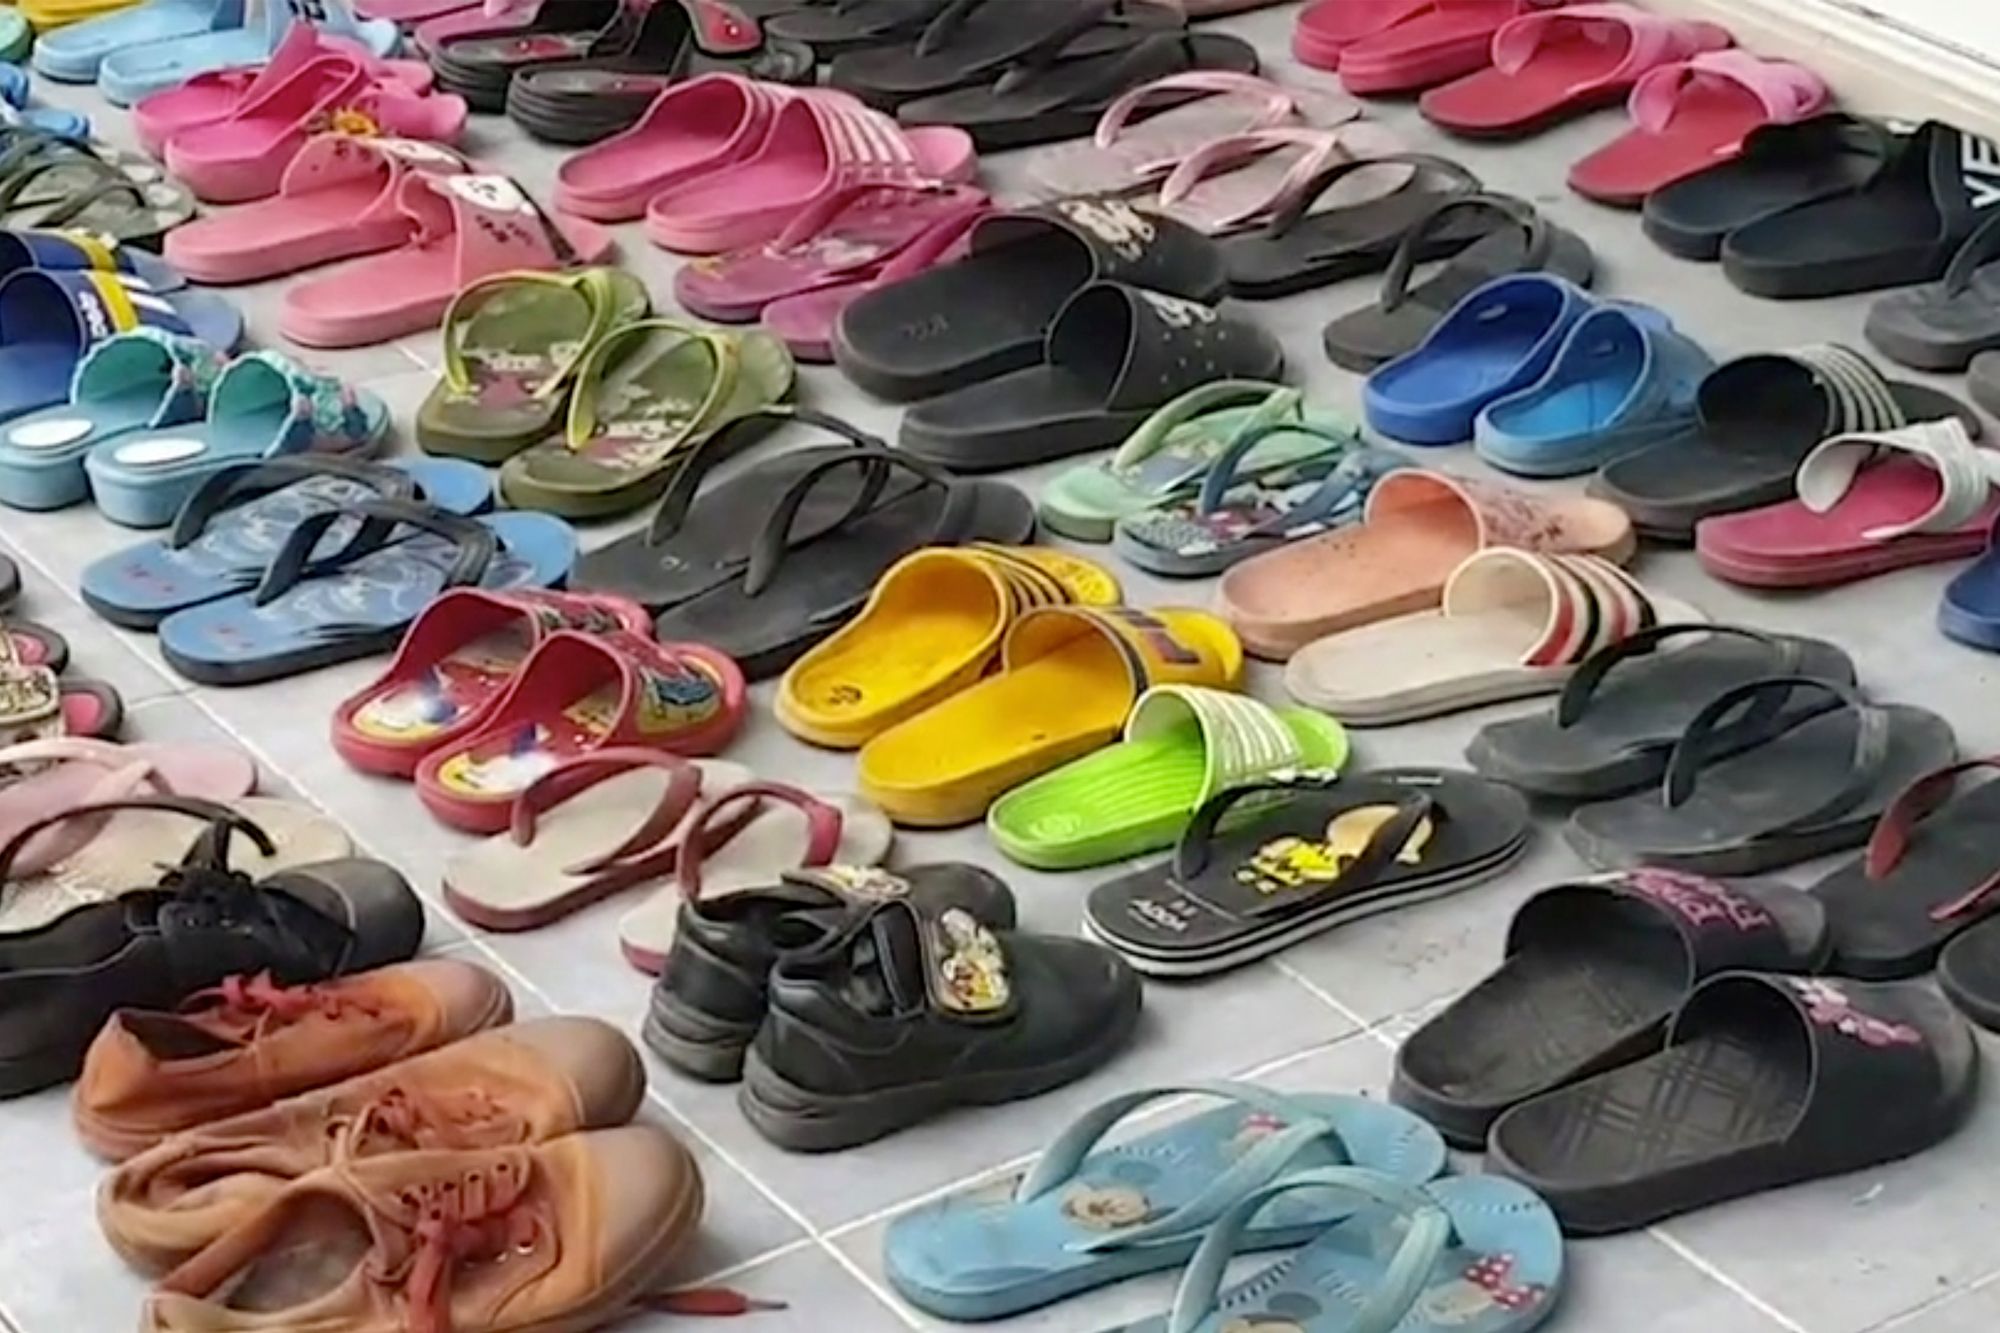 Foot Fetishist Arrested For Stealing 100 Pairs Of Flip Flops To Have Sex With